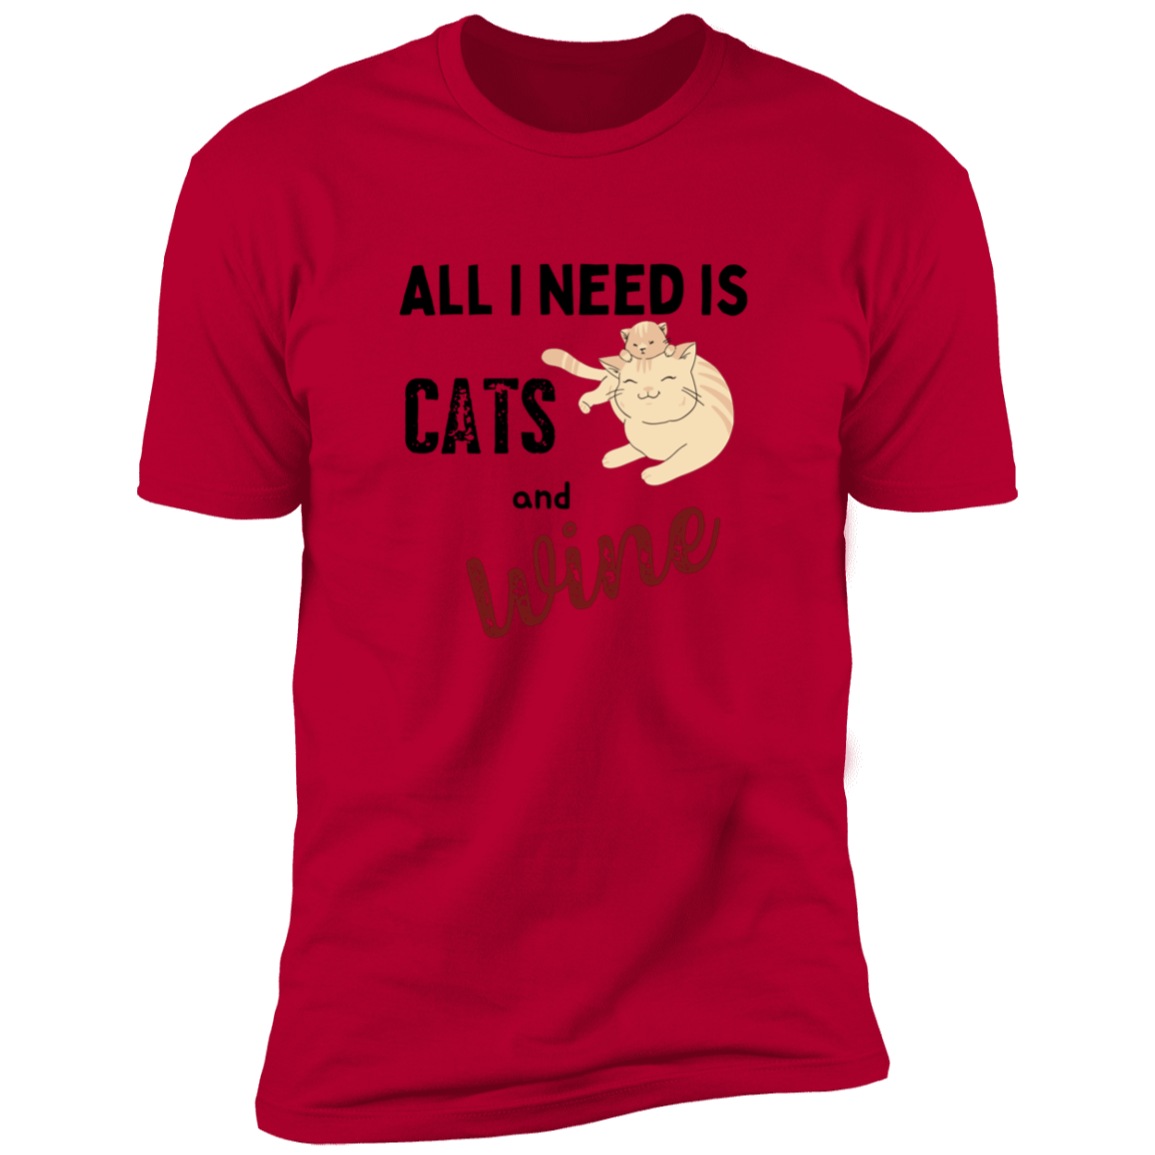 All I Need is Cats and Wine, Cat shirt for humas, in red